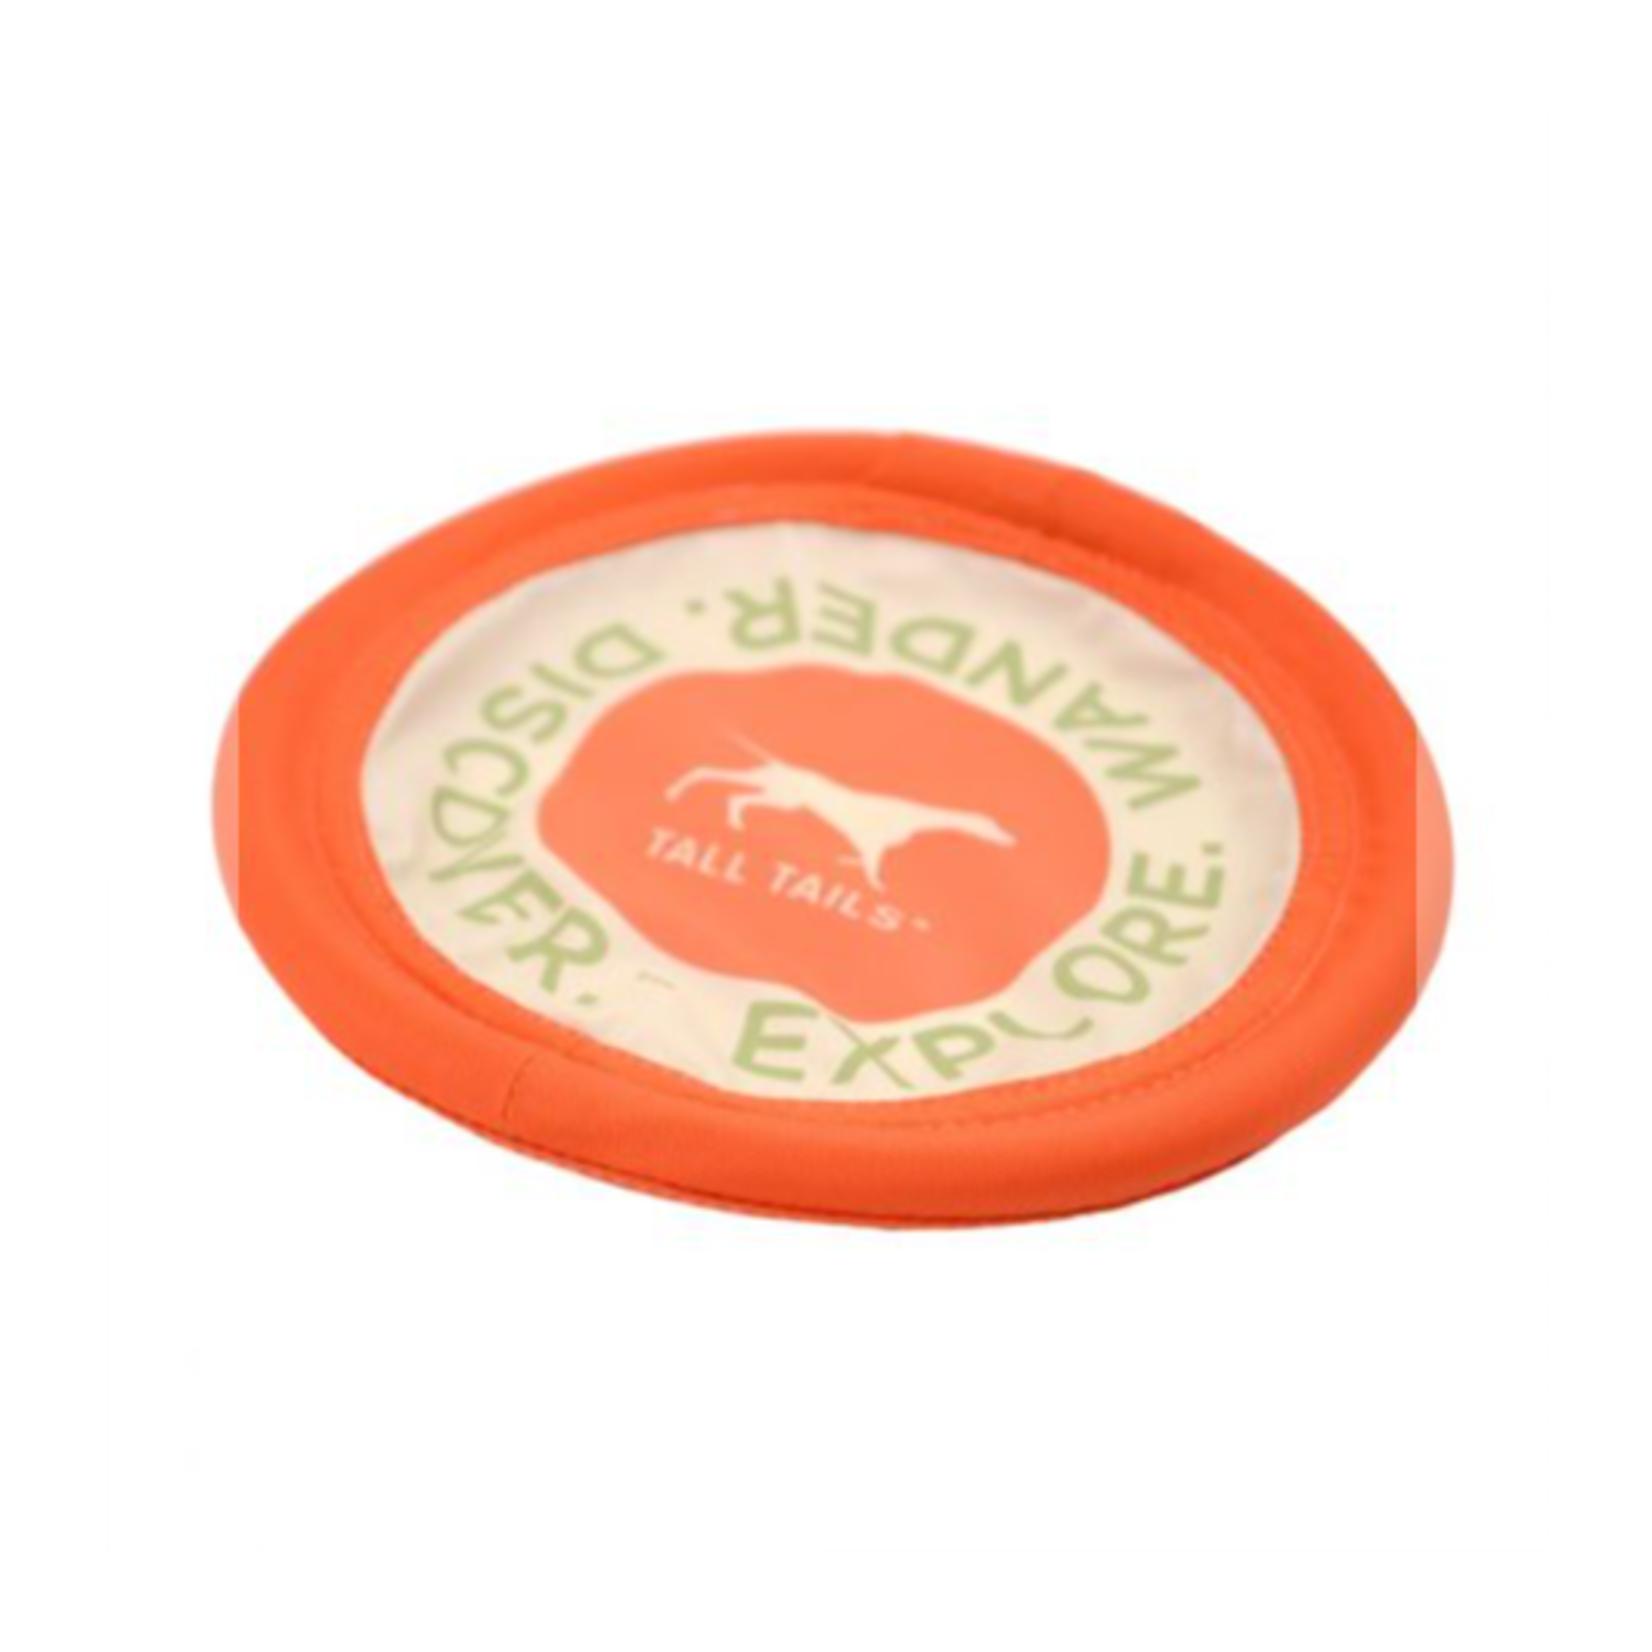 Tall Tails Soft Flying Disc - - Flotable - 10 in - Orange